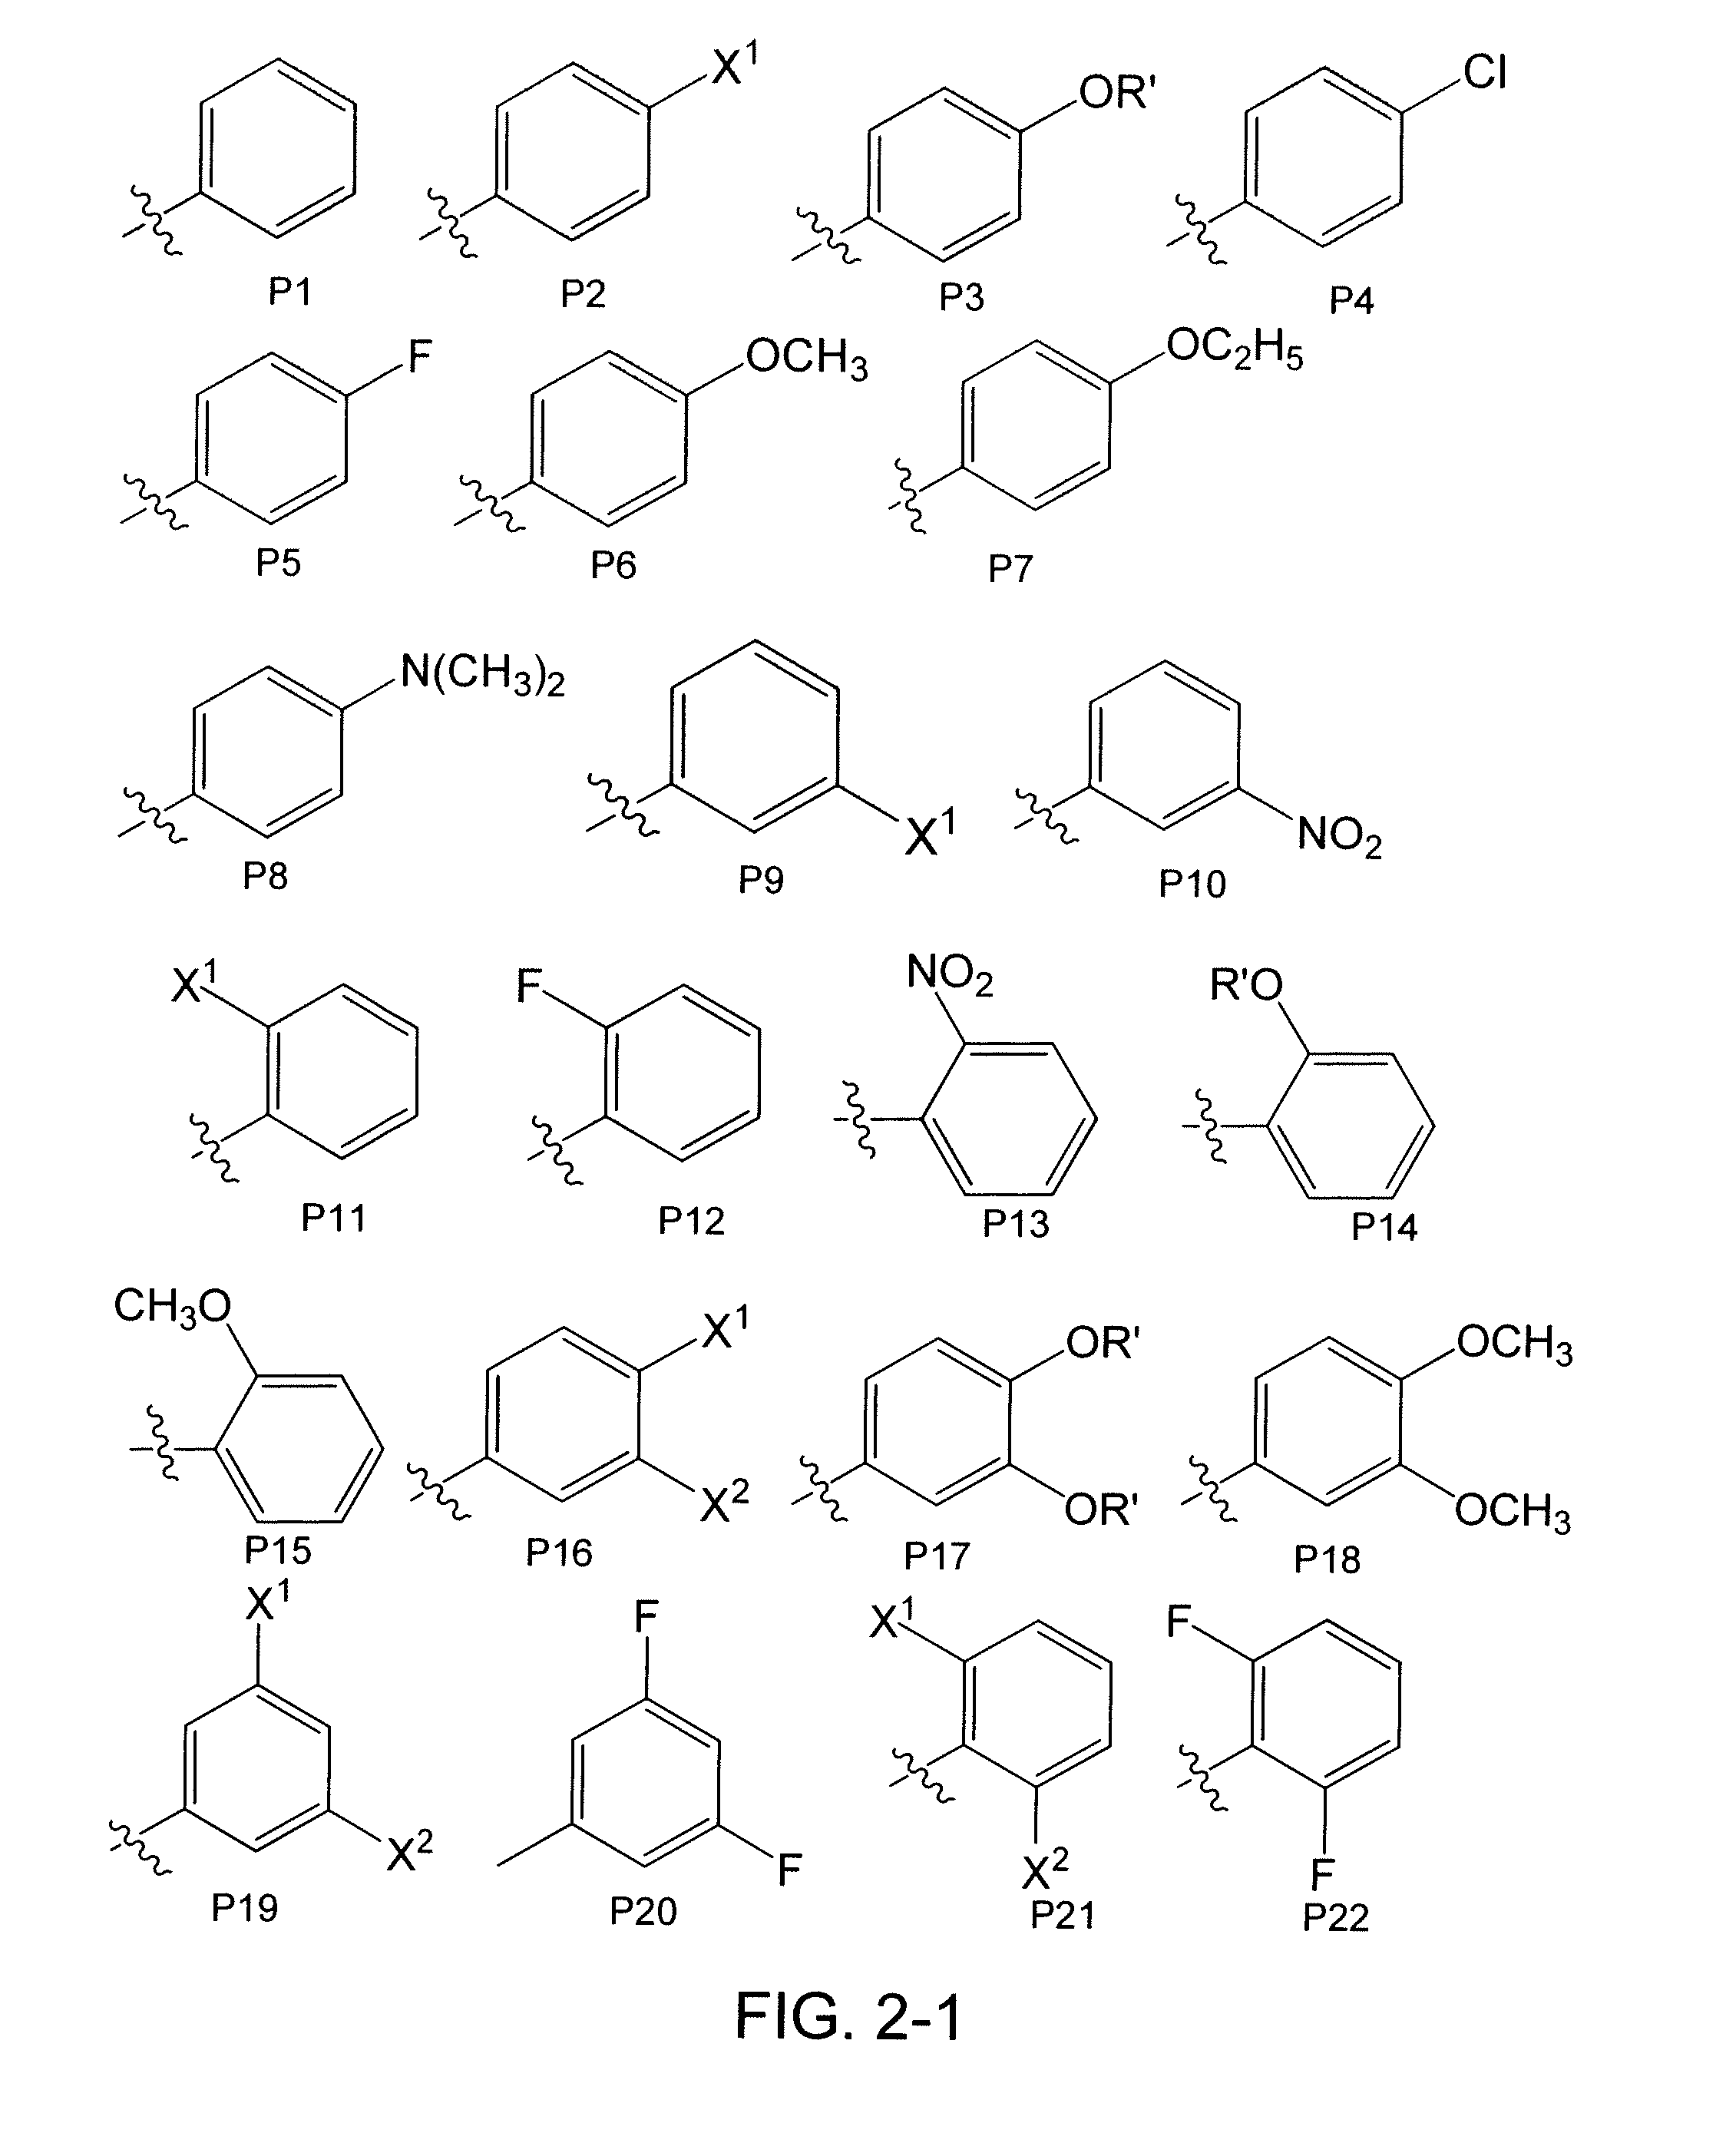 Non-lactone carbocyclic and heterocyclic antagonists and agonists of bacterial quorum sensing